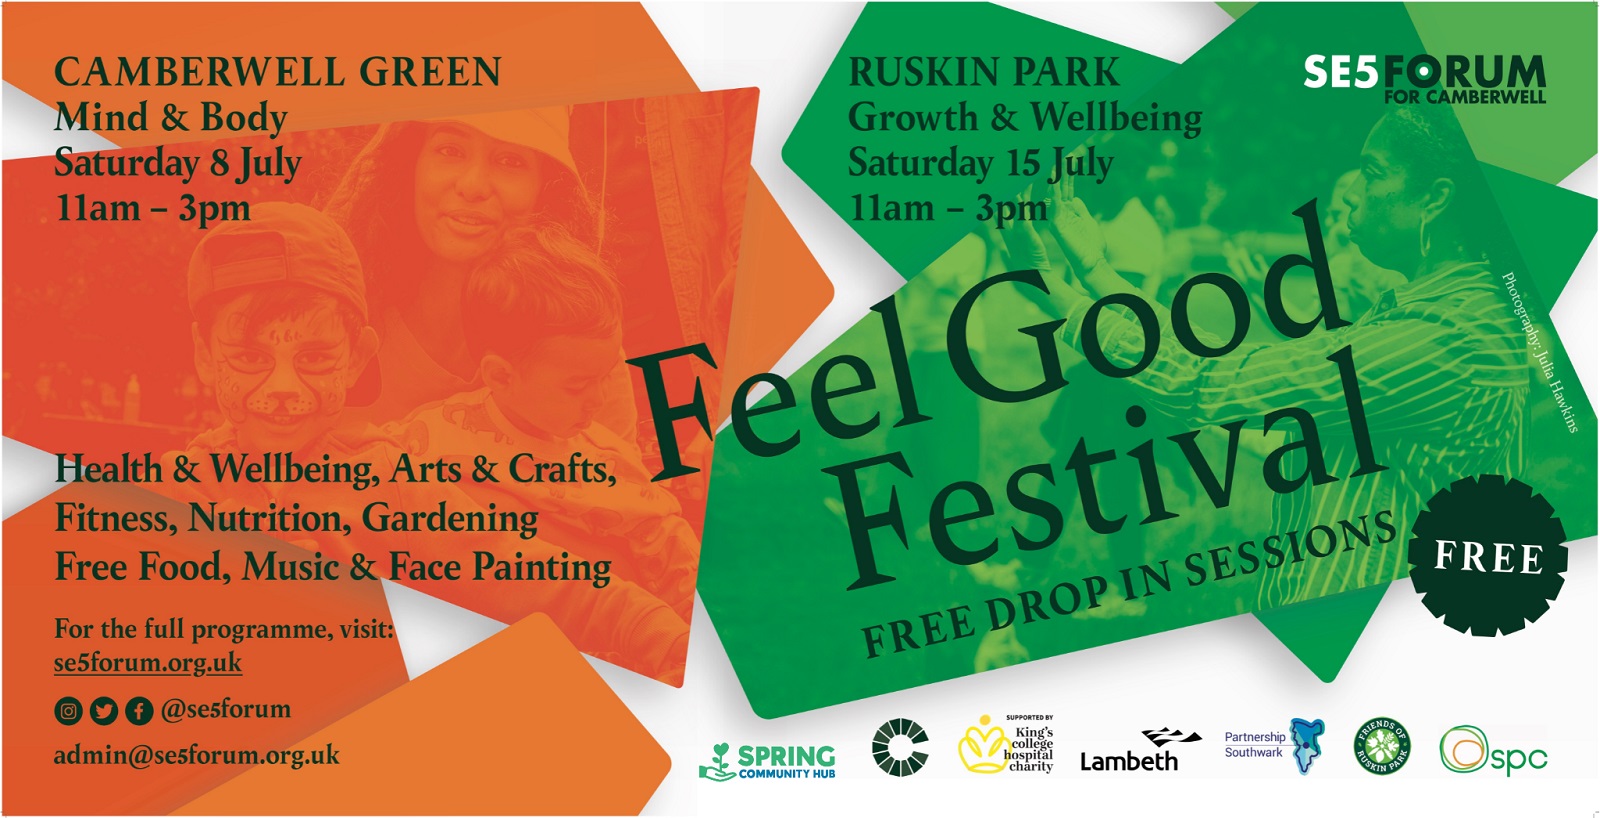 Camberwell Feel Good Festival returns  with free health, wellbeing and creativity for all   